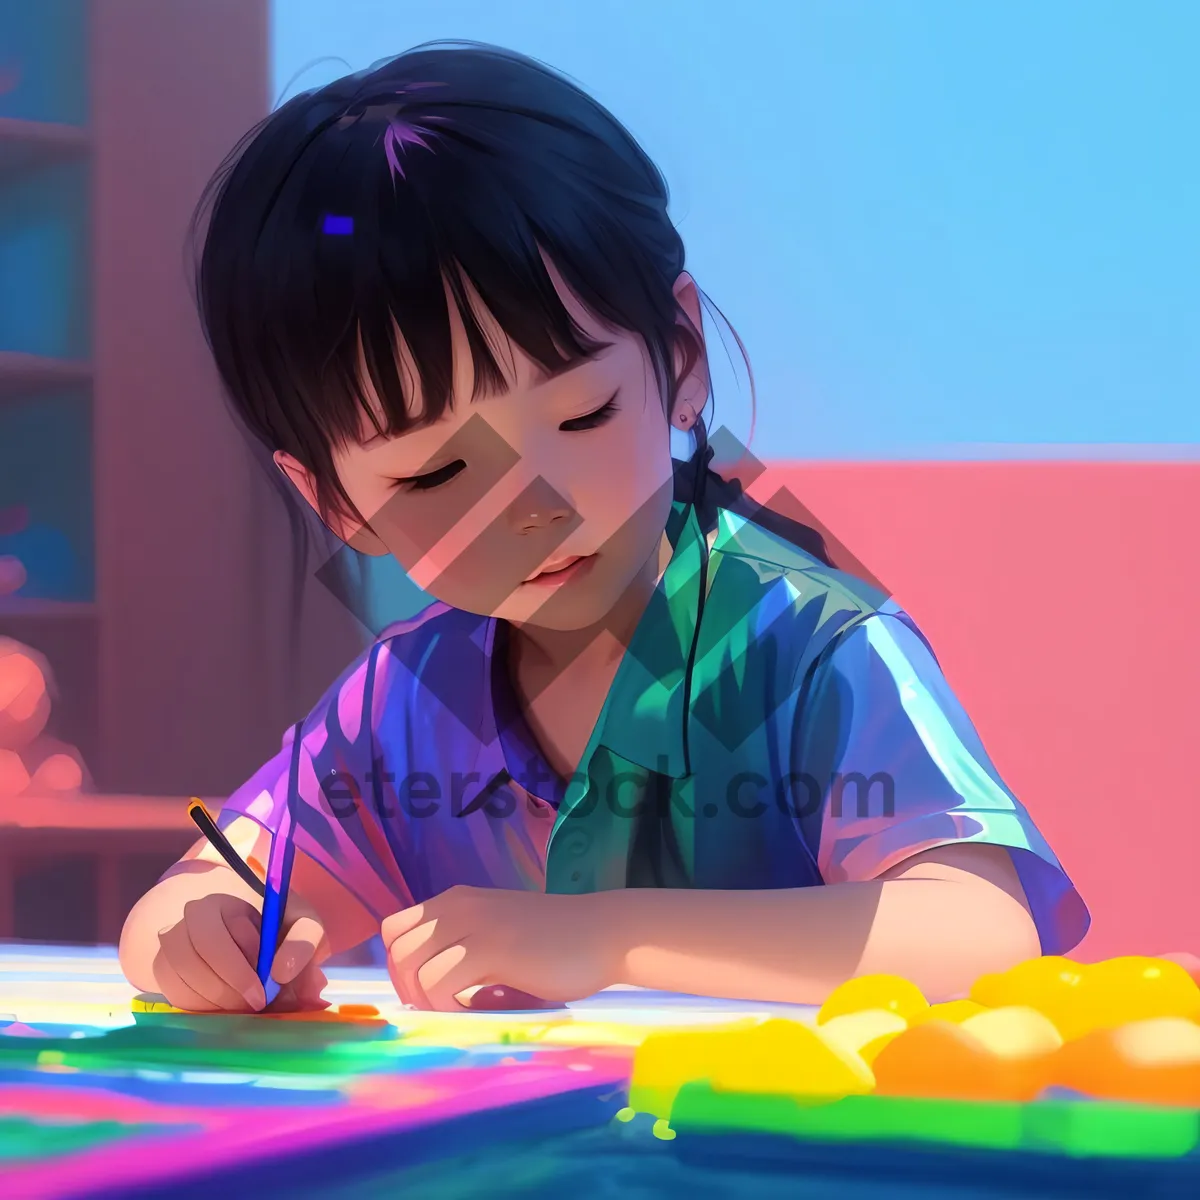 Picture of Smiling child student learning at school desk